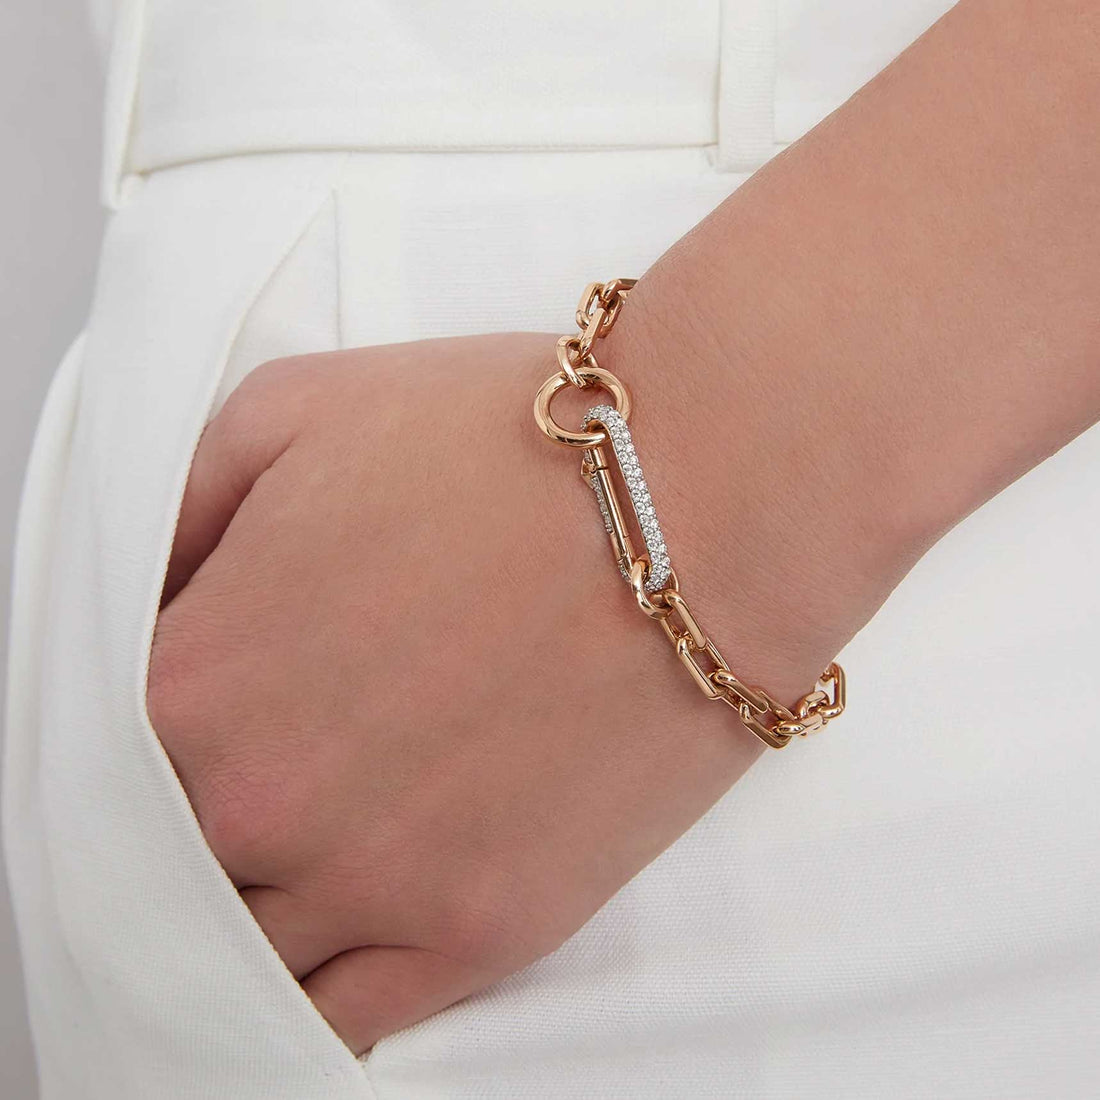 SAXON 18K Yellow GOLD CHAIN LINK BRACELET WITH ELONGATED DIAMOND LINK CLASP